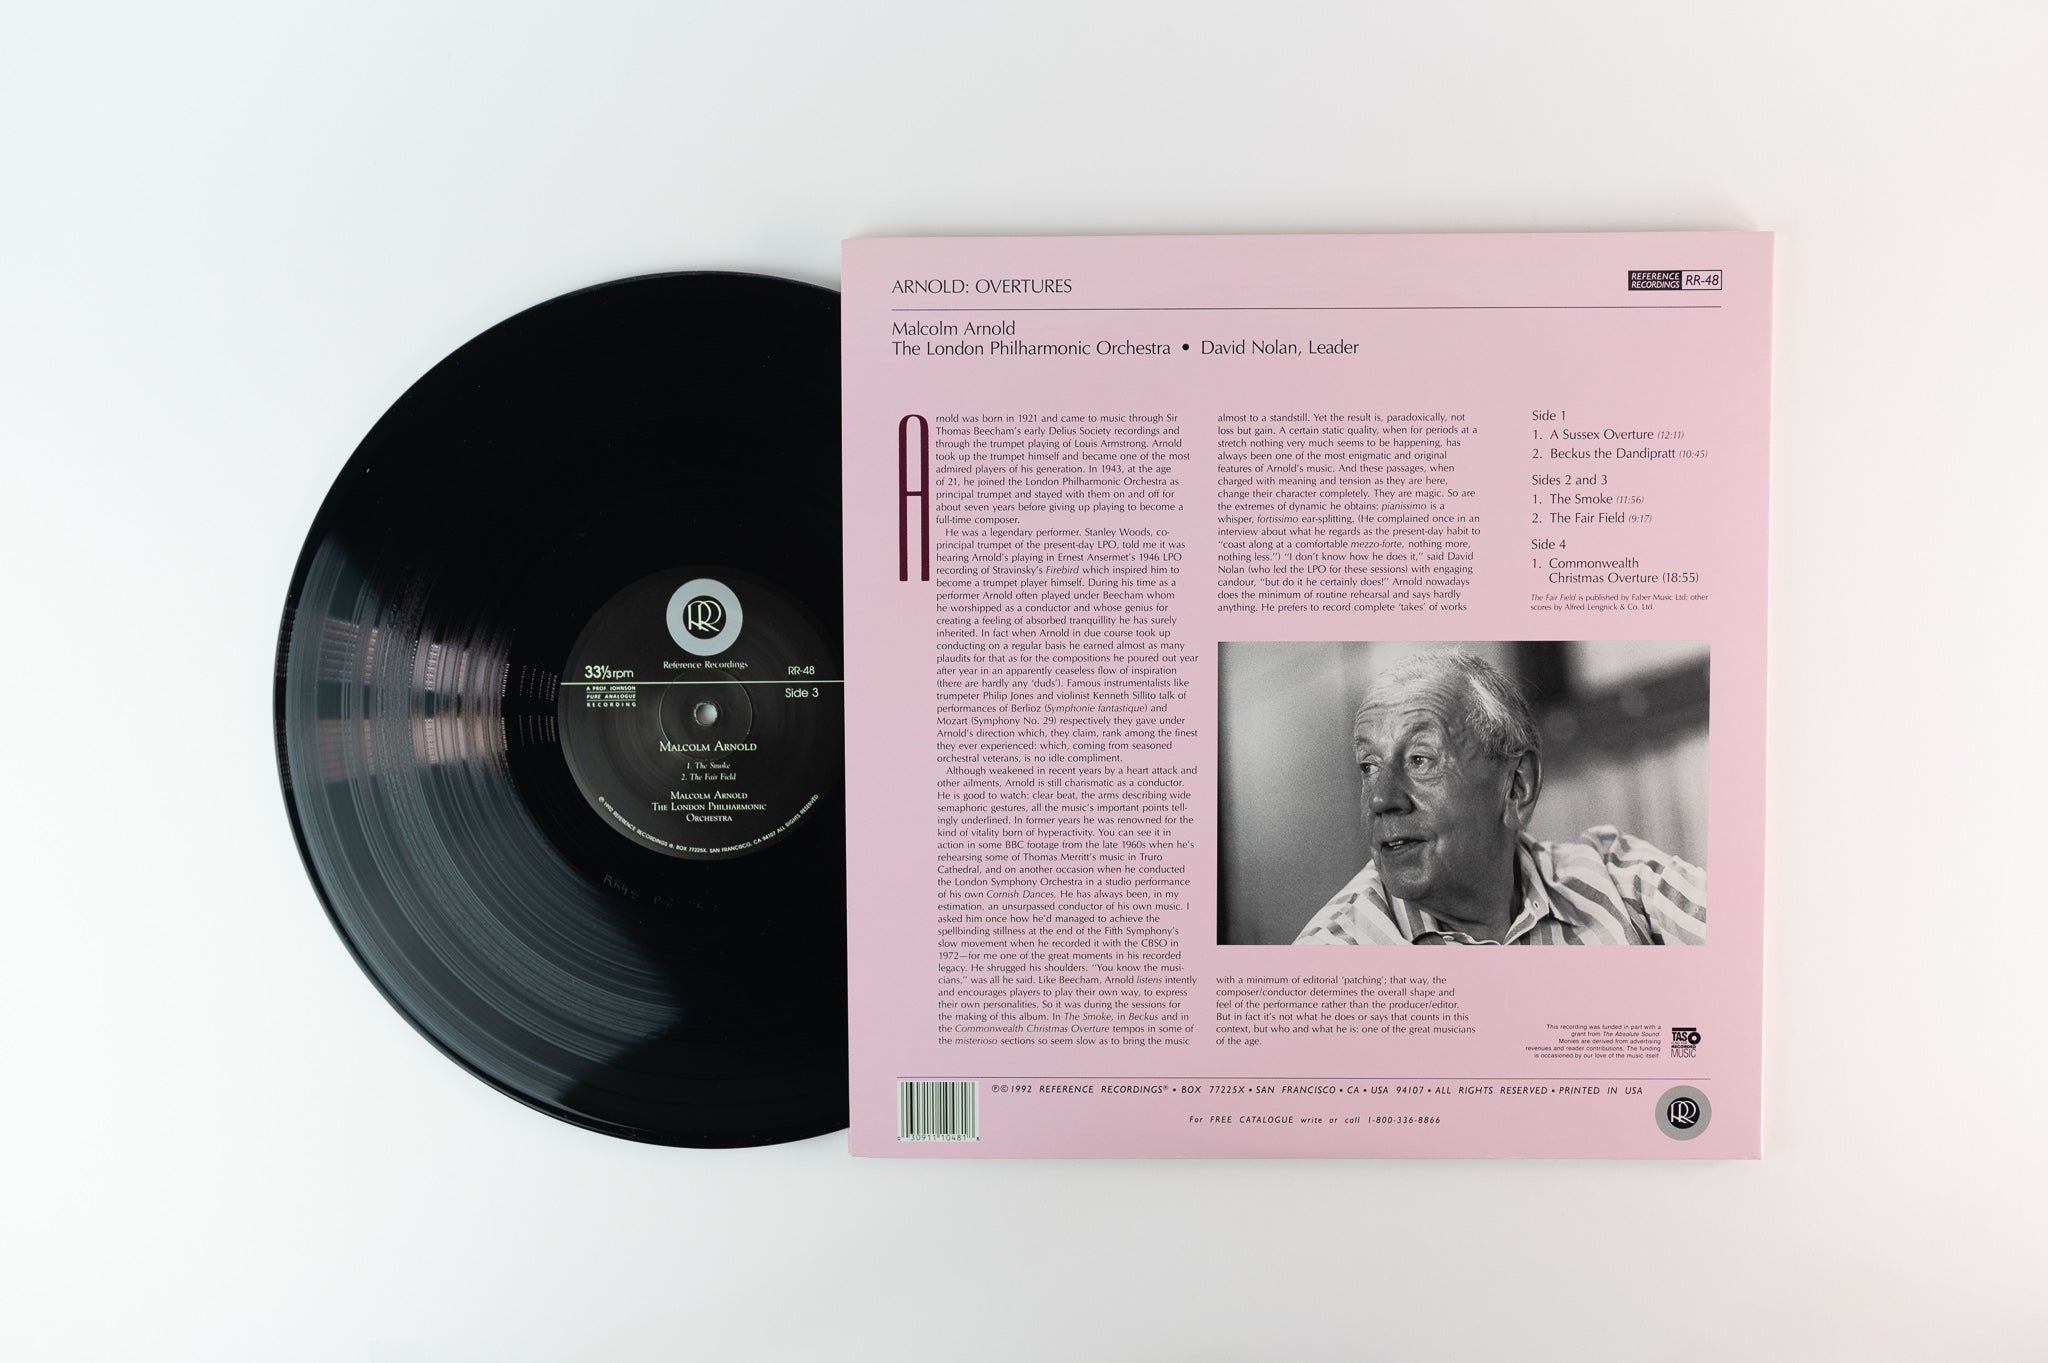 Malcolm Arnold - Arnold Overtures on Reference Recordings